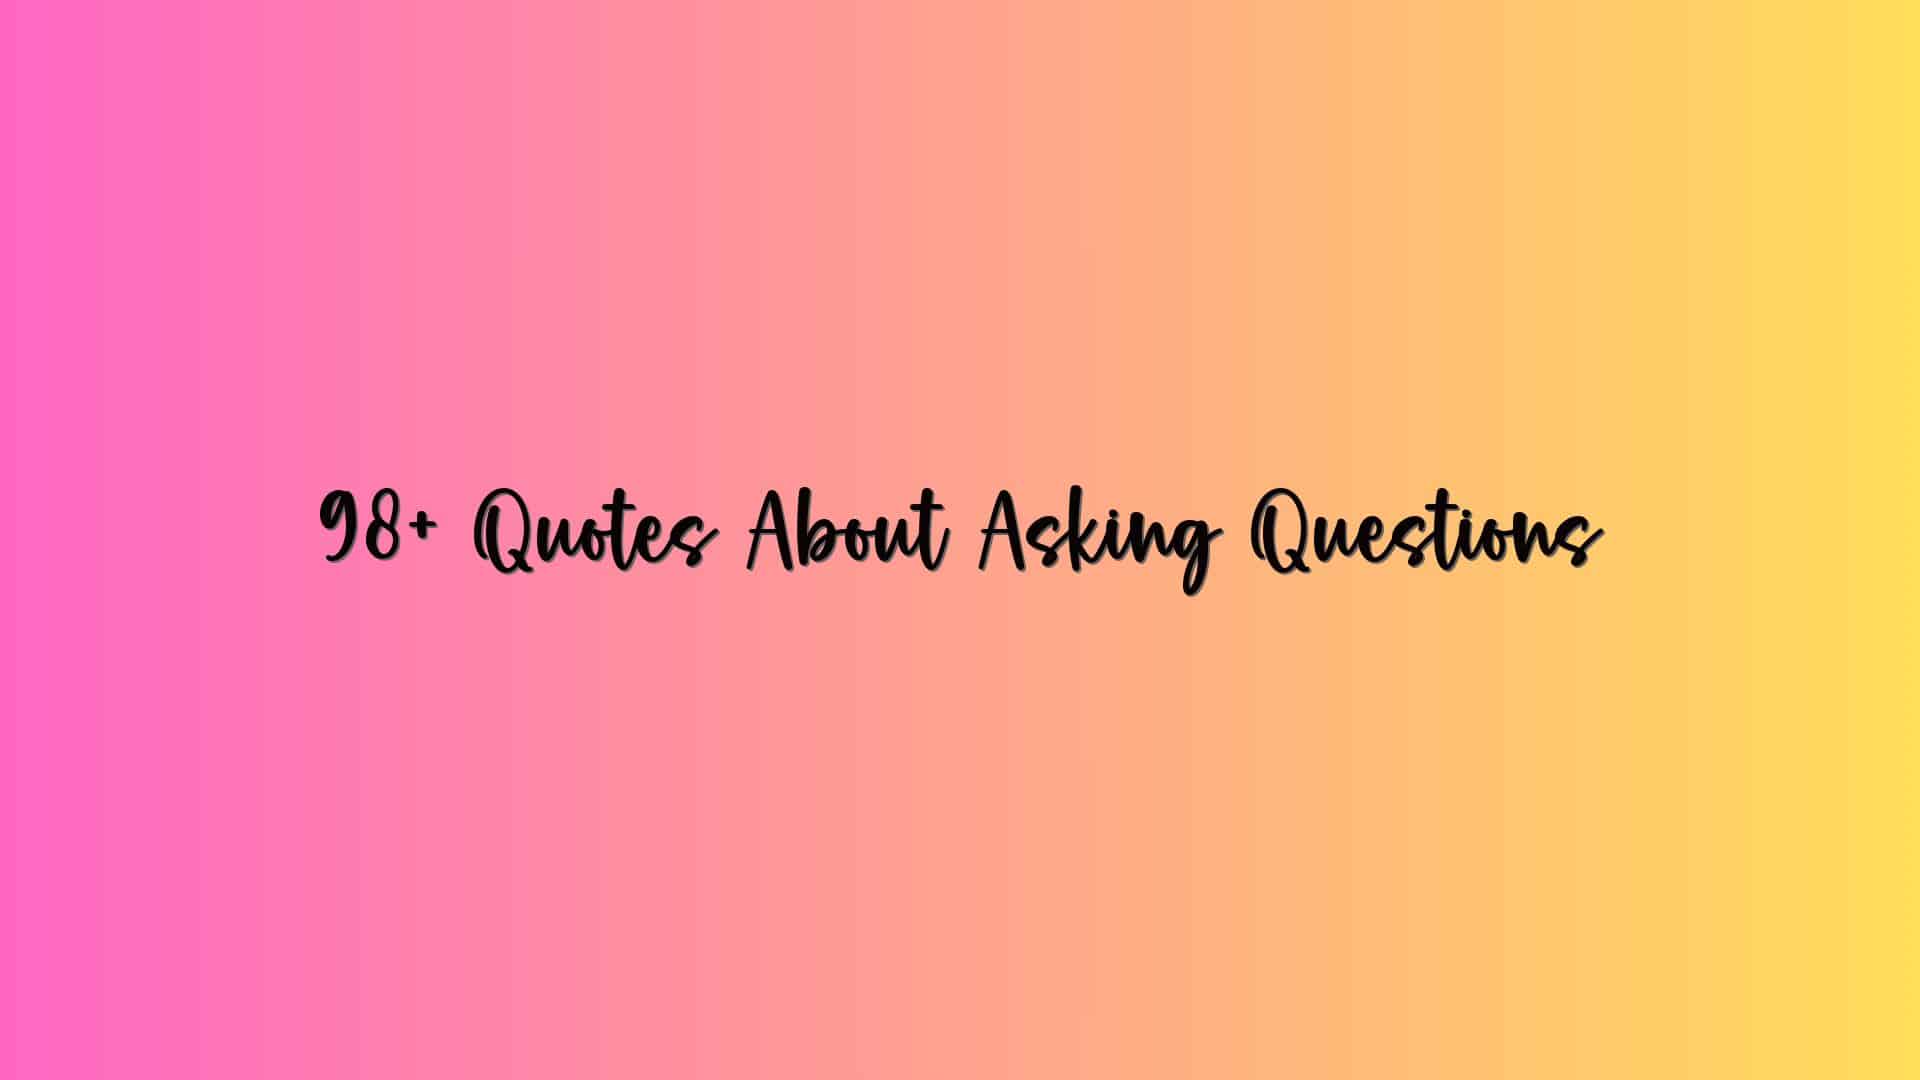 98+ Quotes About Asking Questions